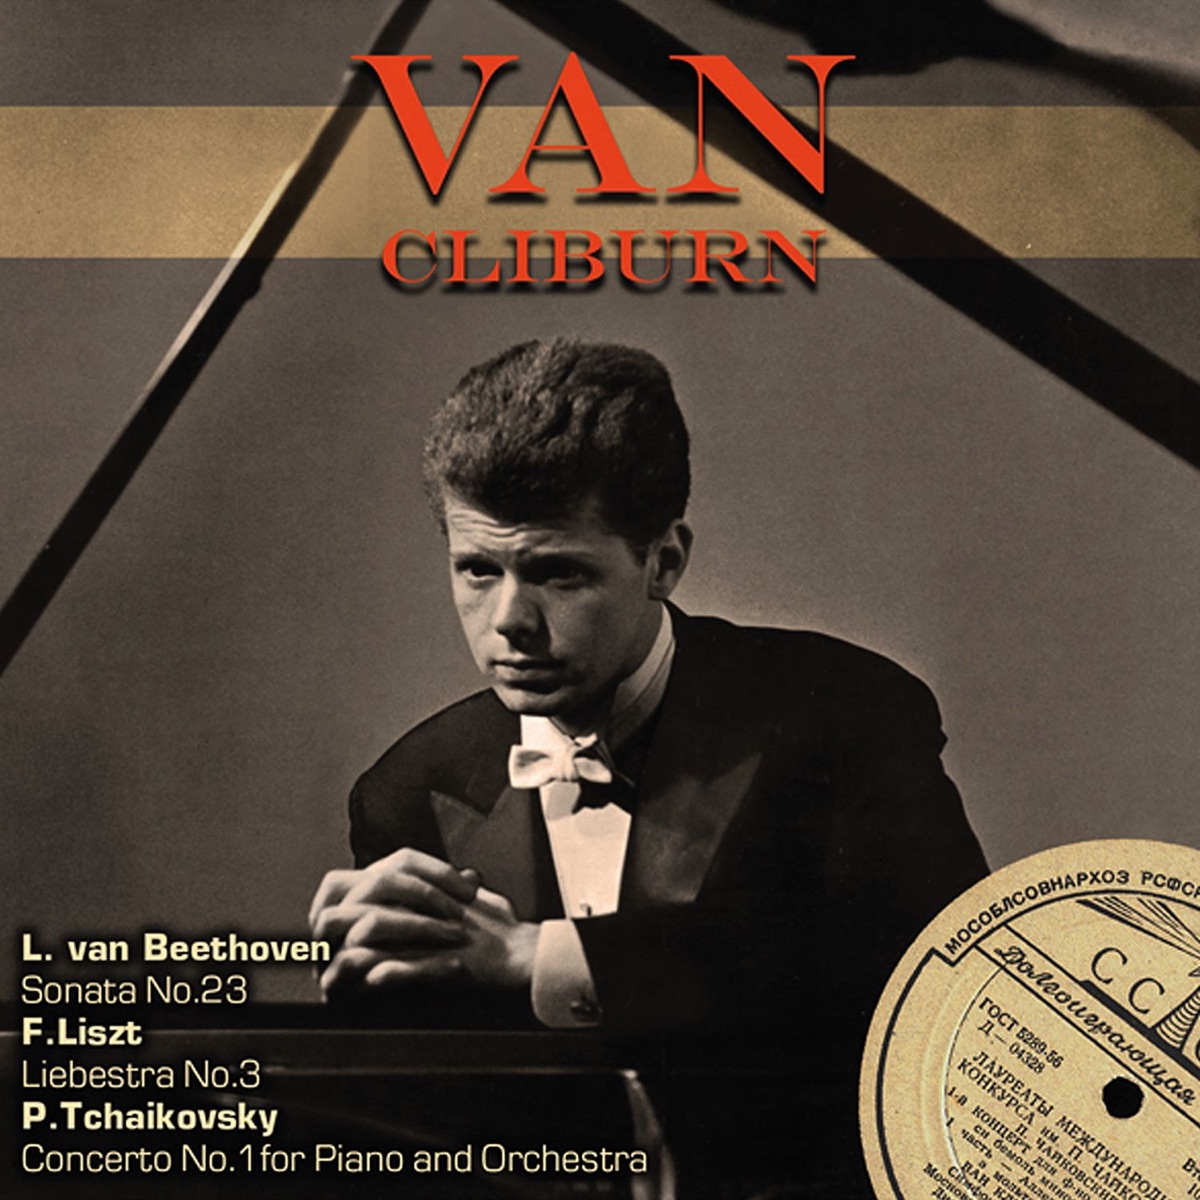 Beethoven: Sonata No. 23 - Liszt: Liebesträume No. 3 - Tchaikovsky: Concerto  No. 1 for Piano and Orchestra by Van Cliburn on Apple Music